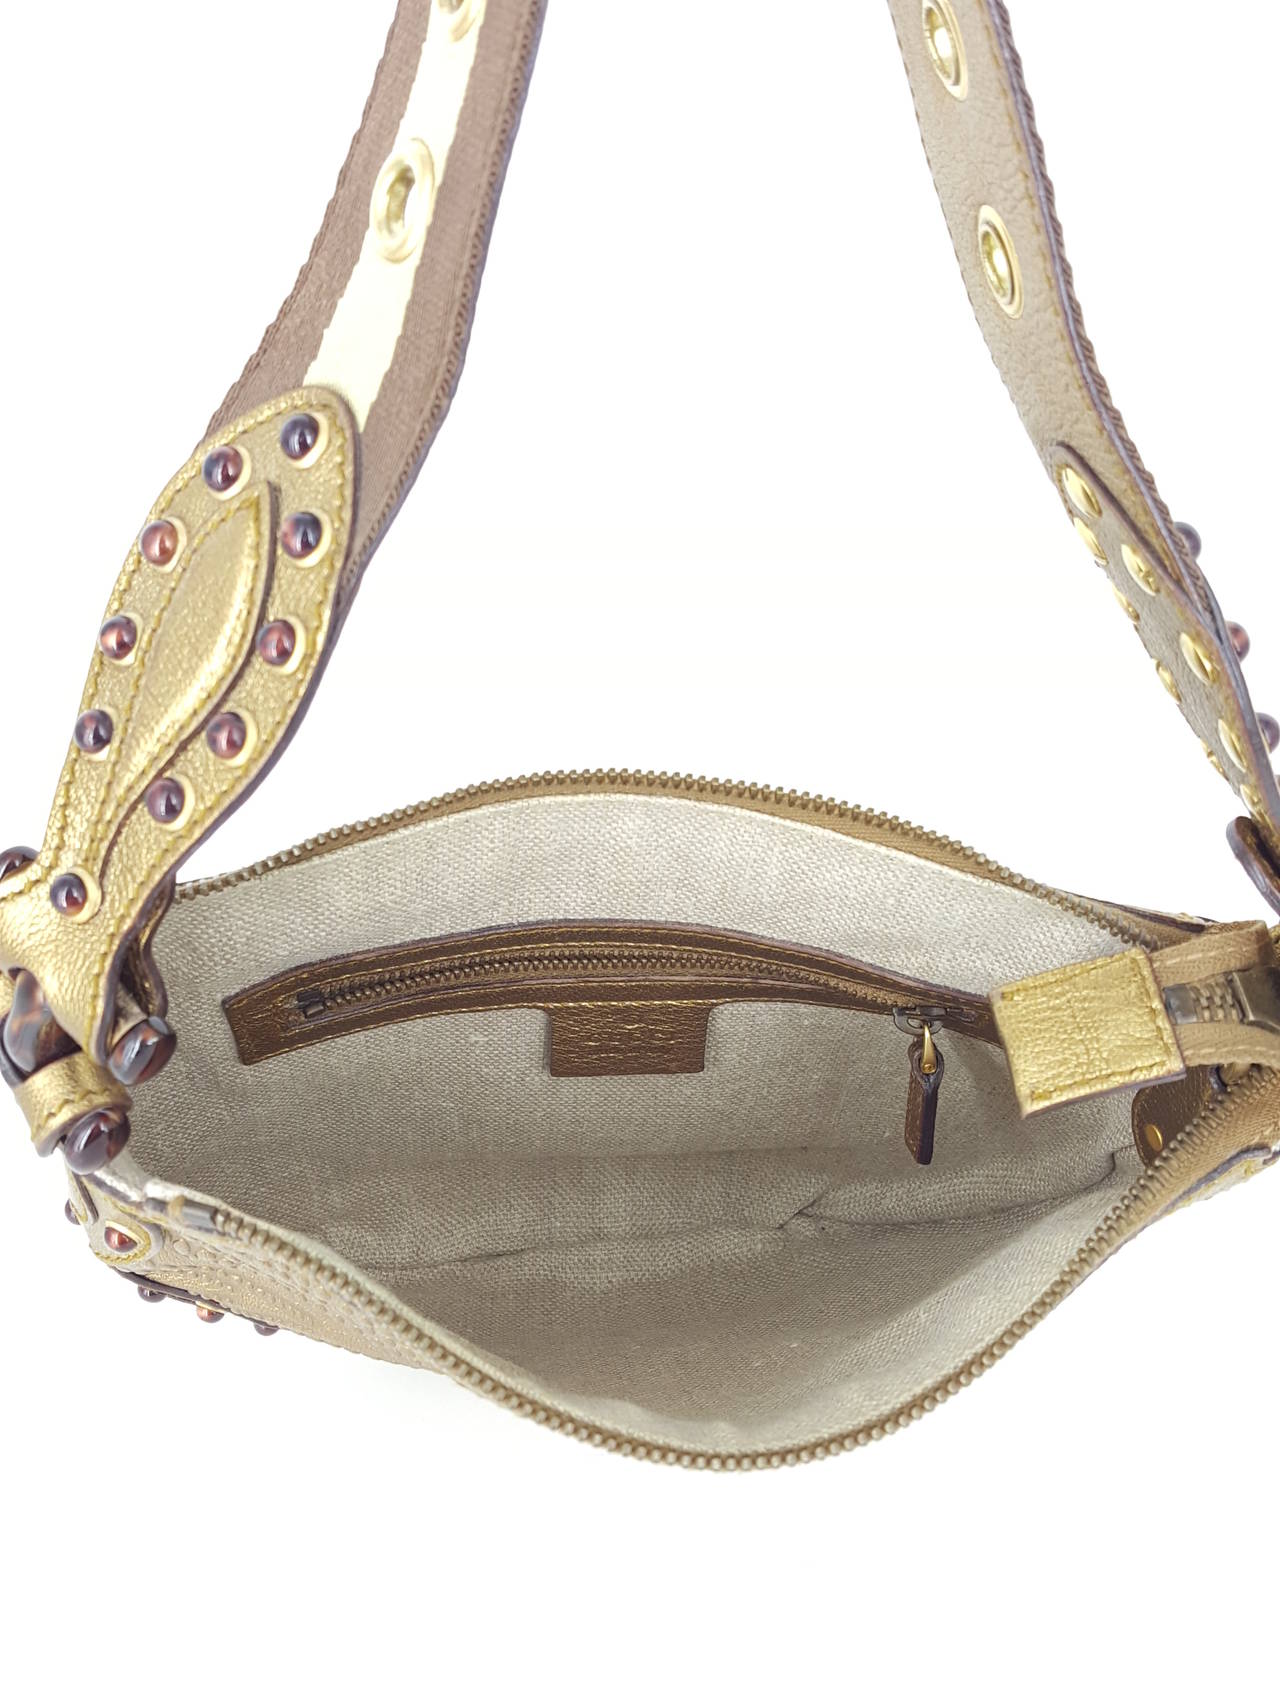 Limited Edition Gucci Bronze Leather Pelham Hobo With Tortoise Studs In New Condition For Sale In Delray Beach, FL